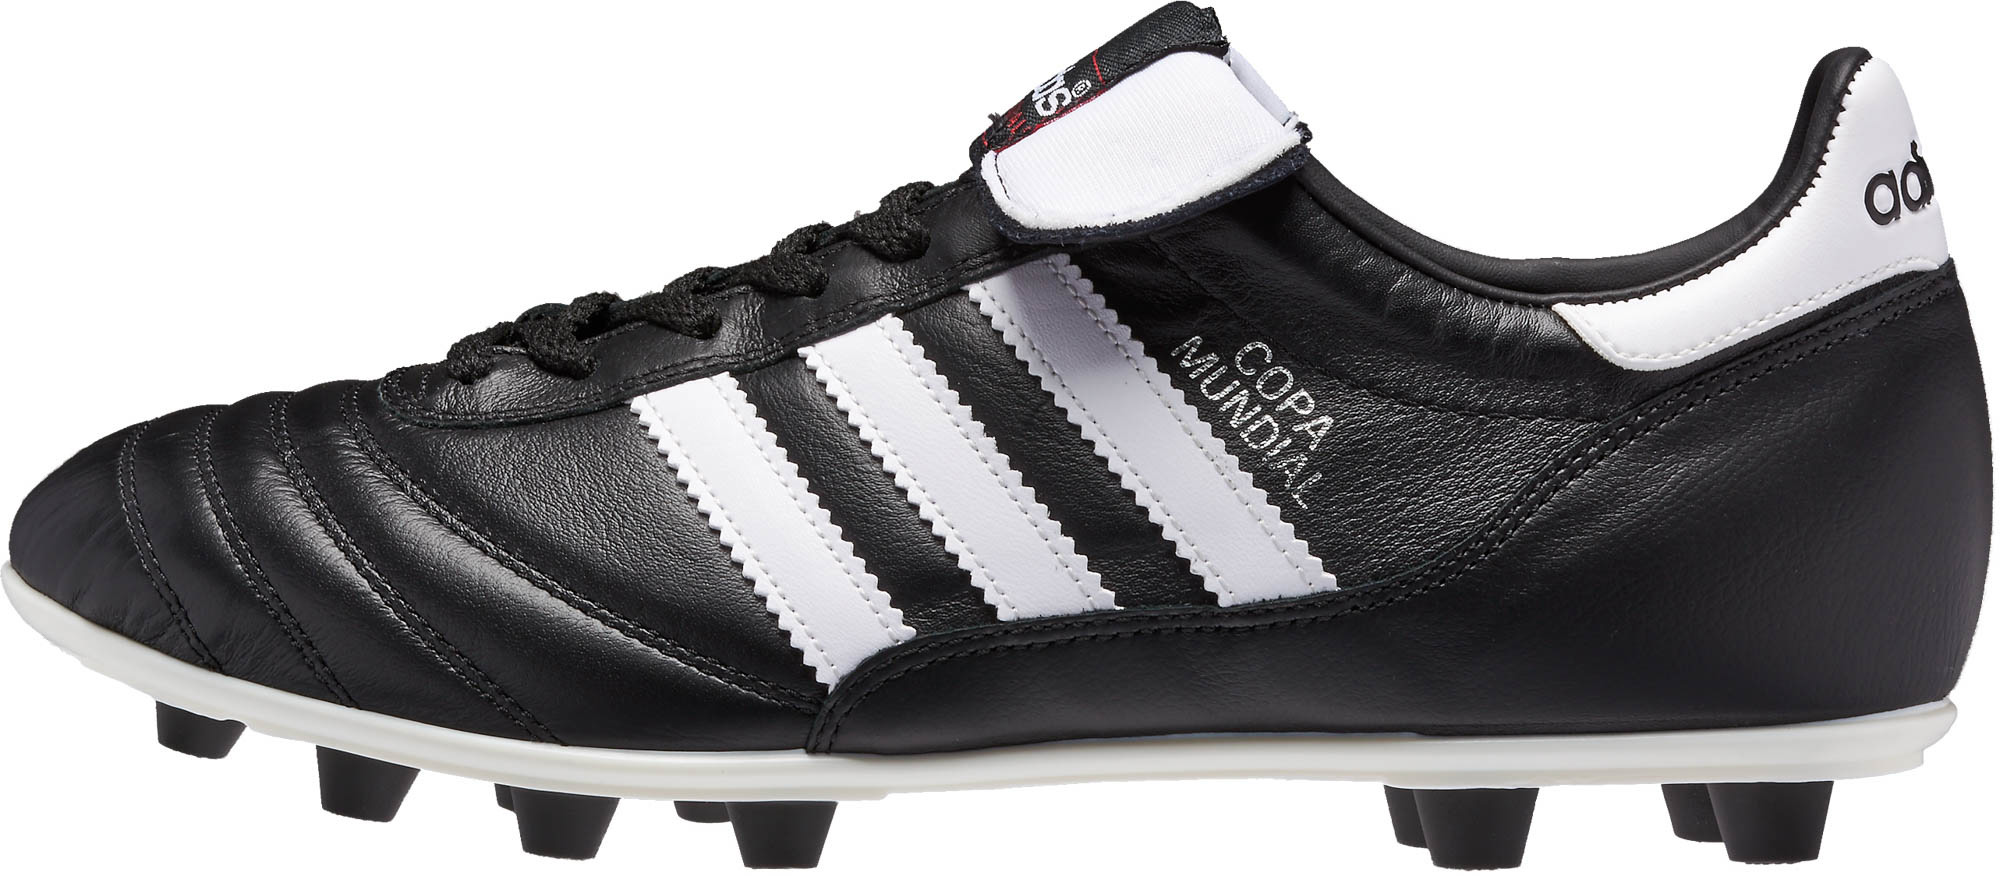 adidas youth copa mundial fg soccer cleats